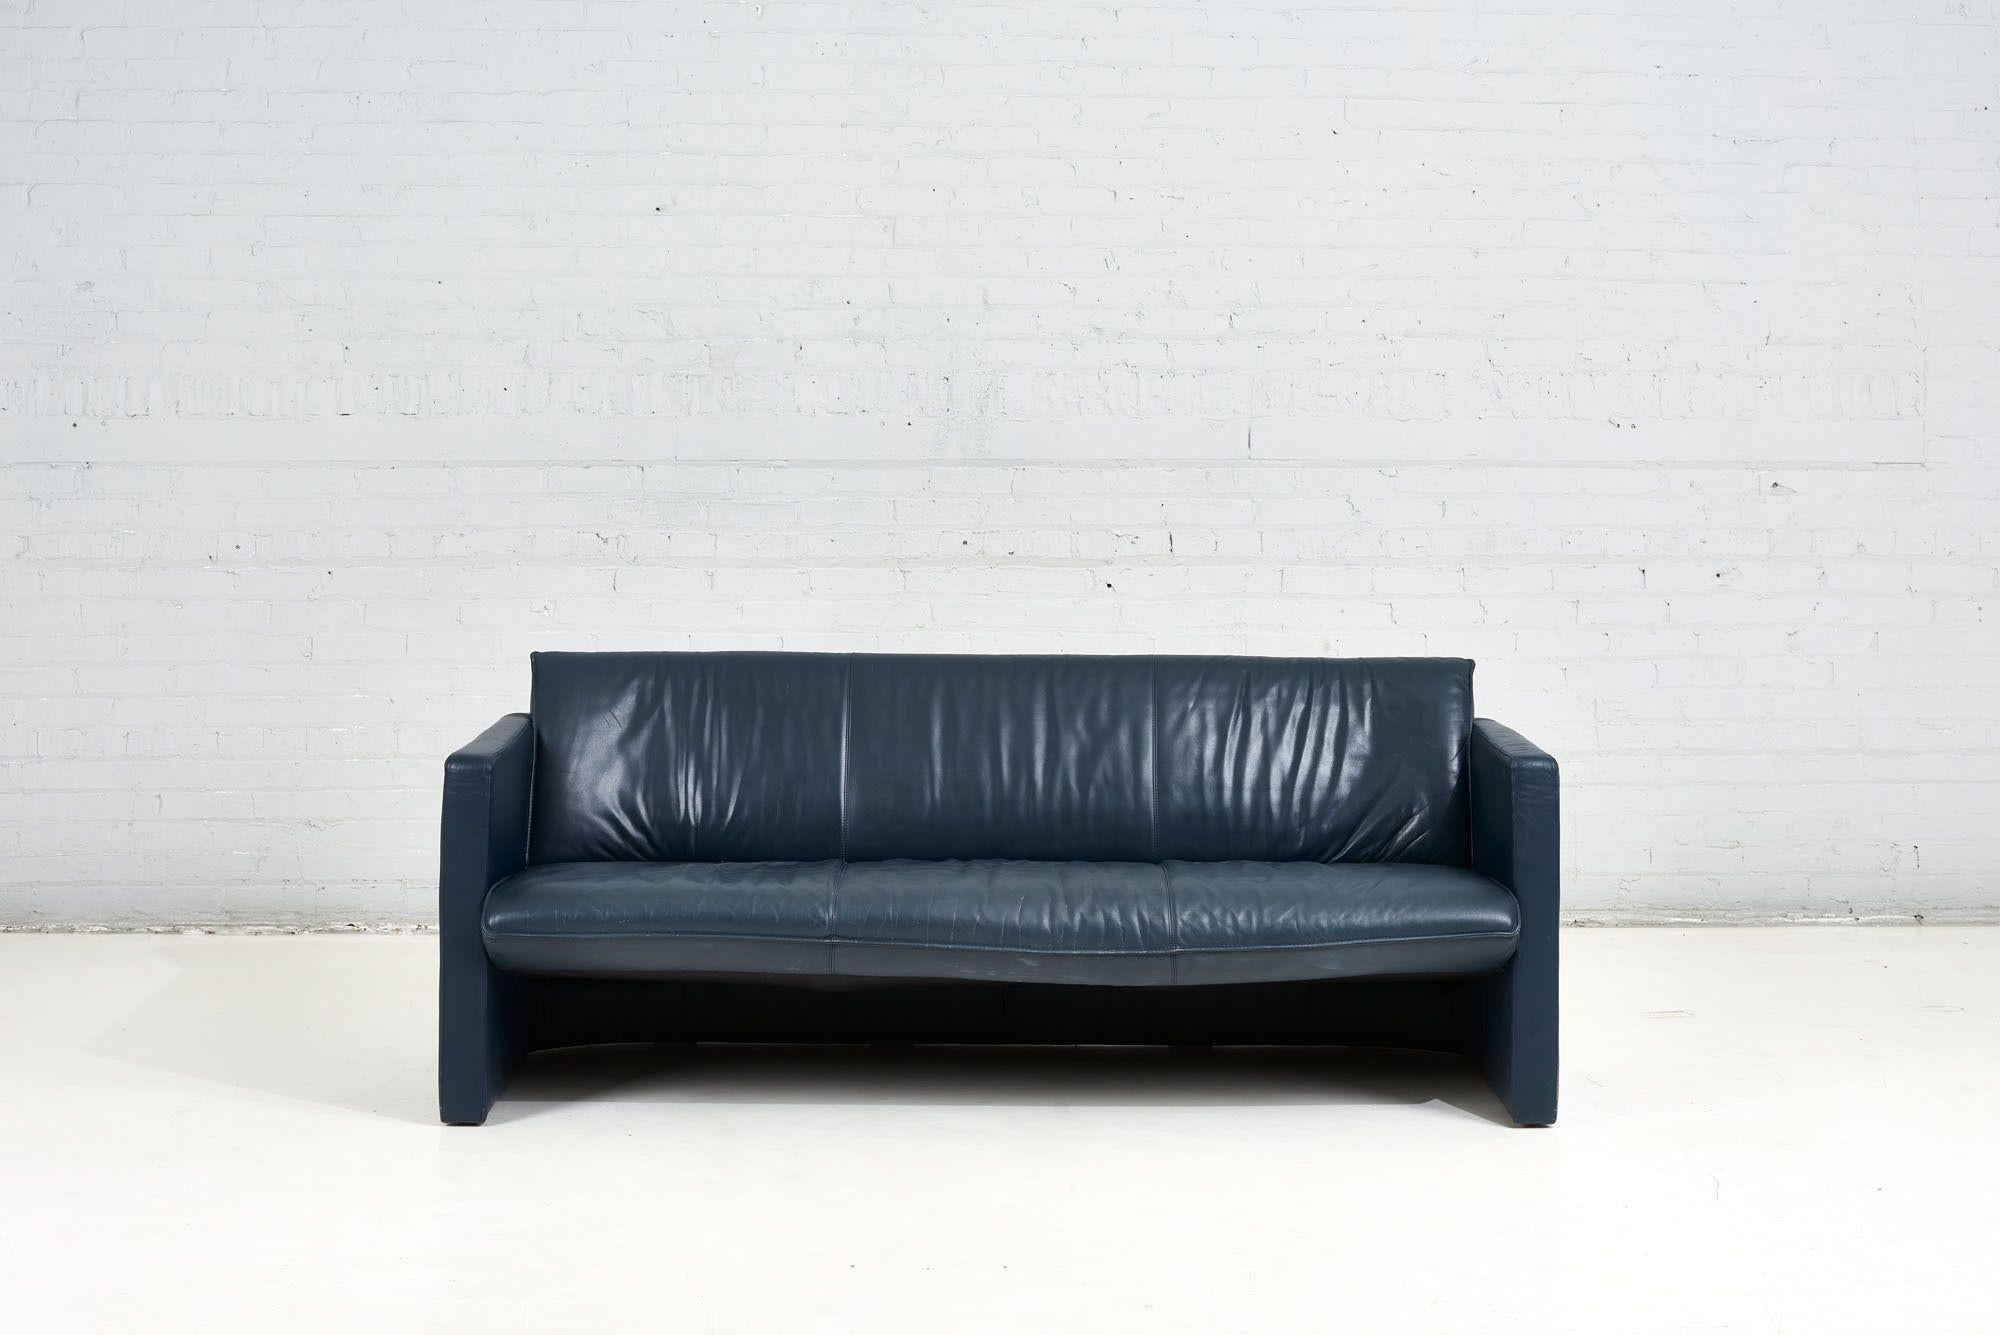 American Post Modern Leather Sofa by Leolux, 1970